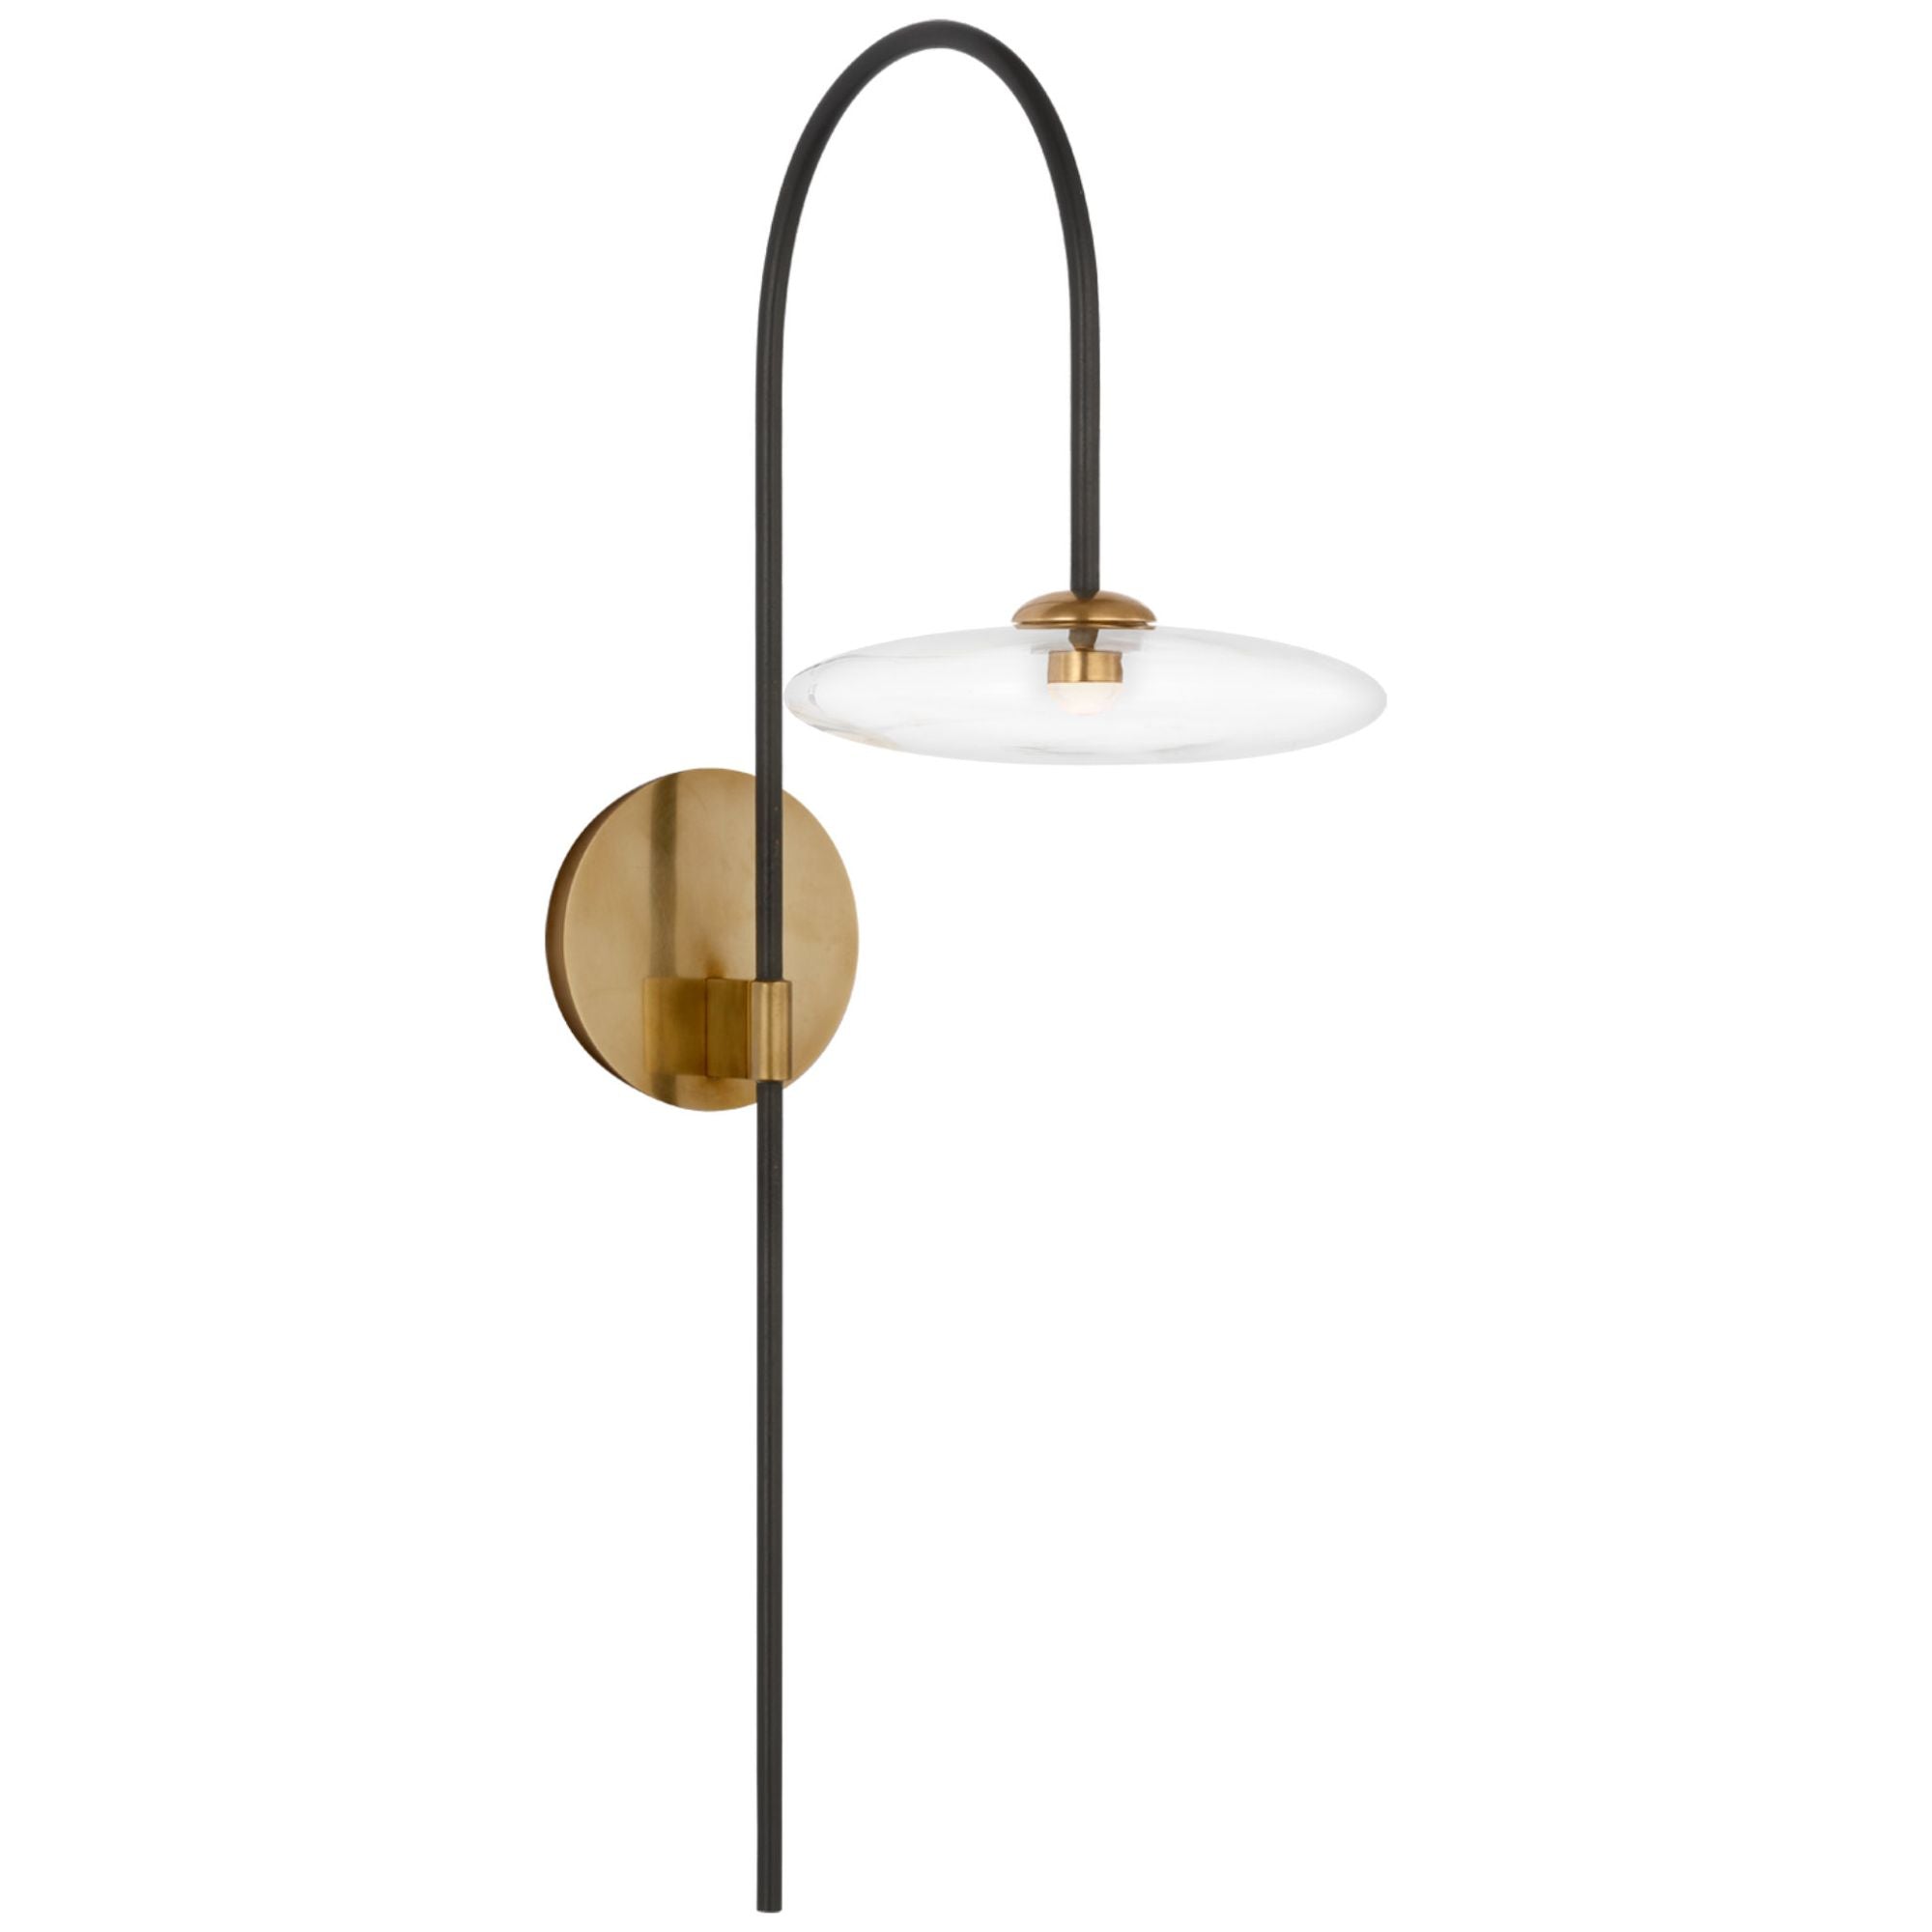 Ian K. Fowler Calvino Arched Single Sconce in Aged Iron and Hand-Rubbed Antique Brass with Clear Glass